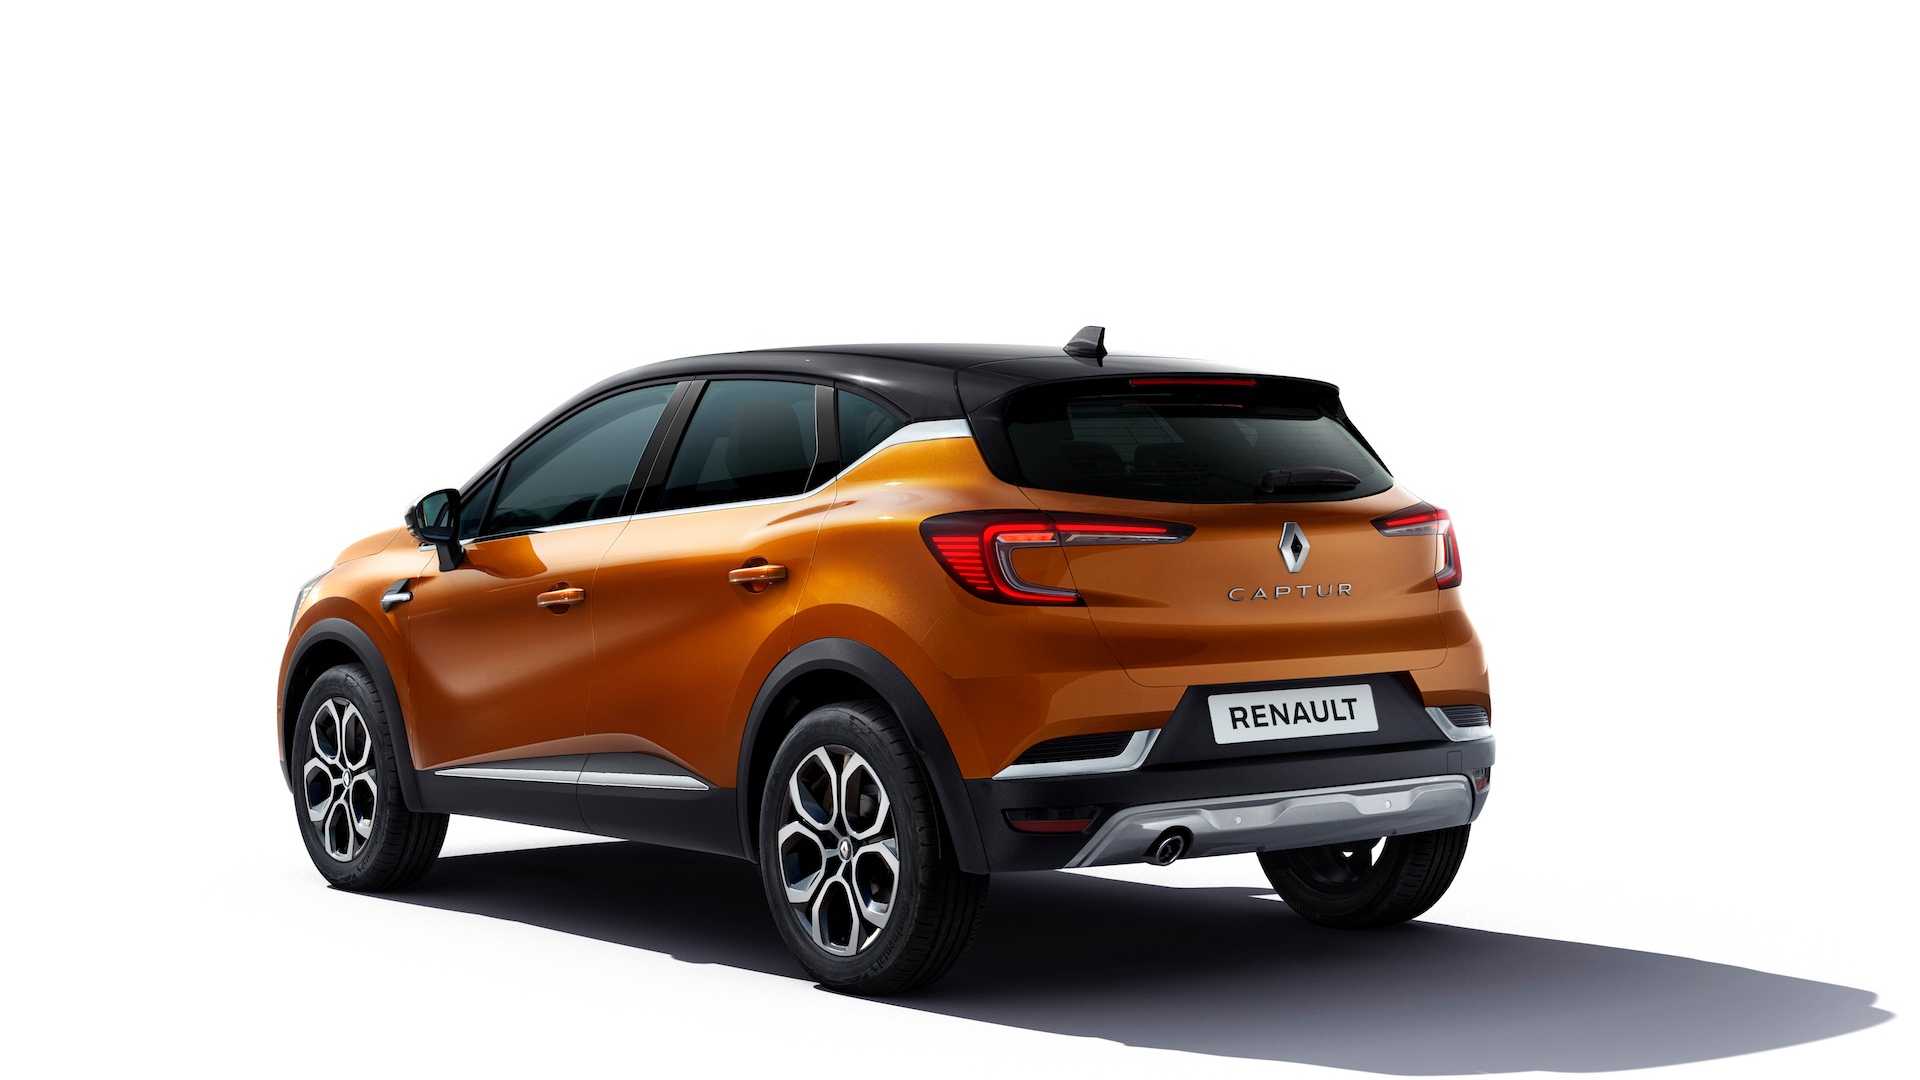 Renault Captur exterior - Rear Right Angled